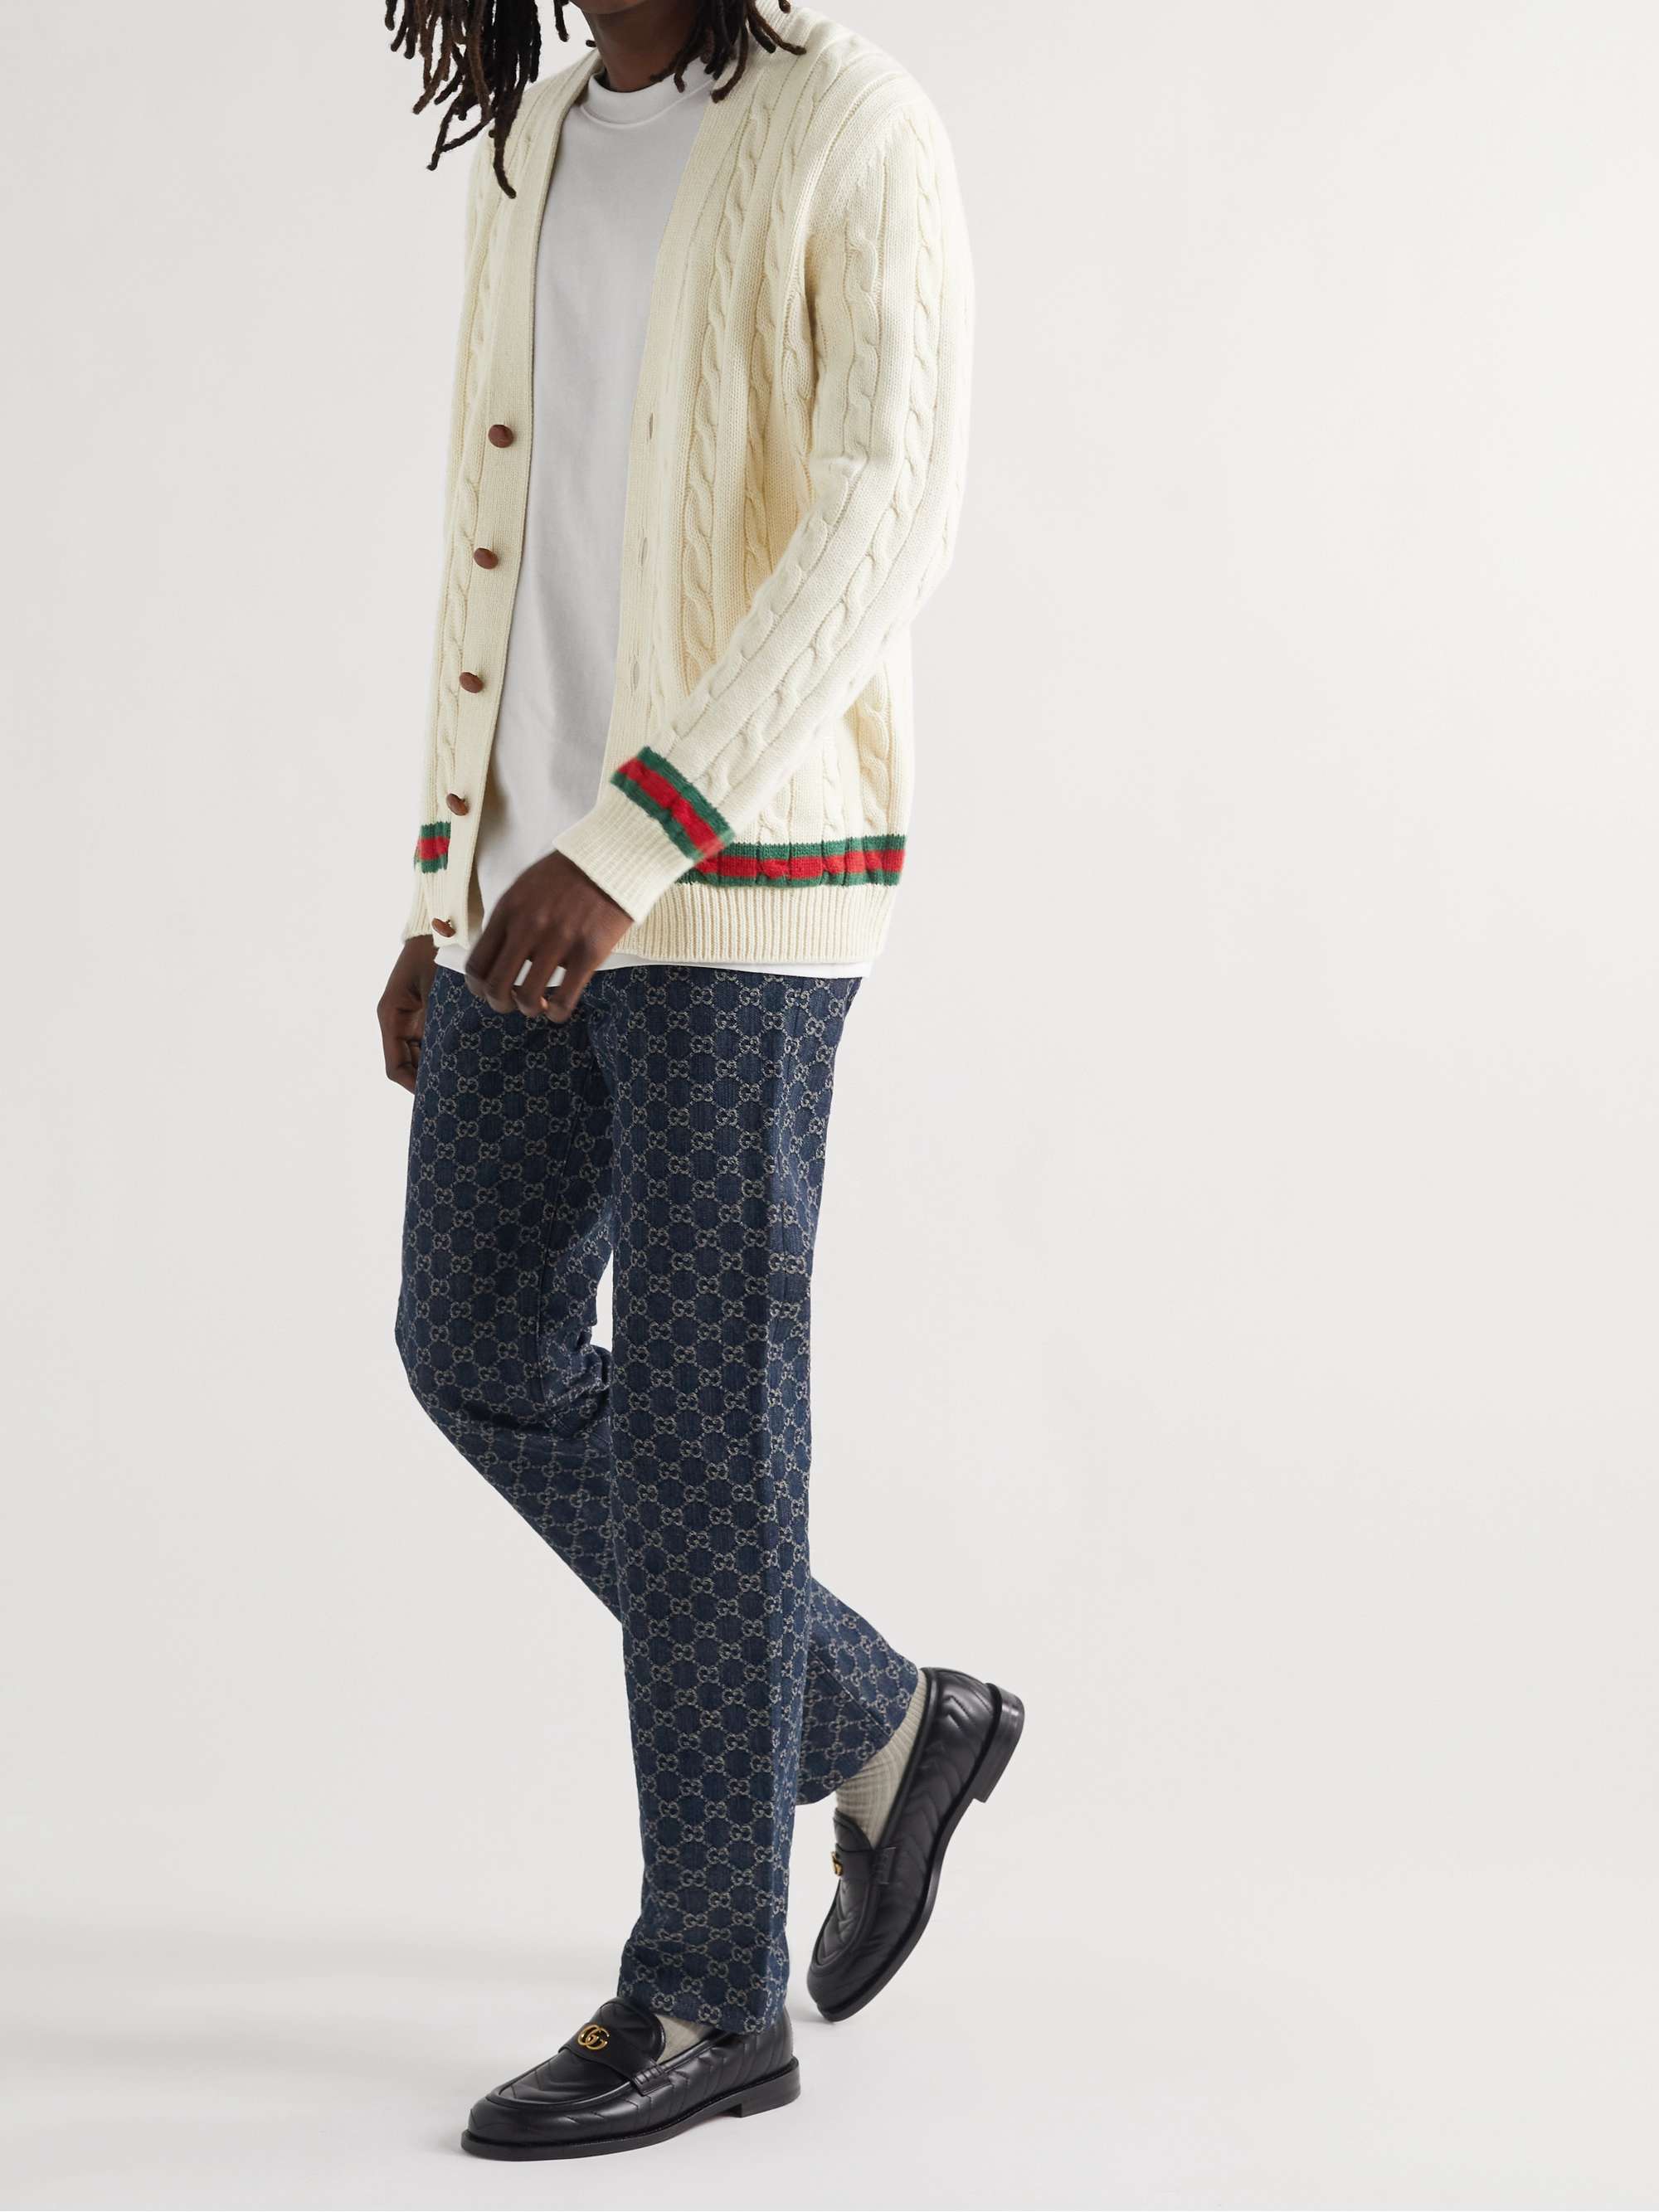 GUCCI Cable-Knit Cashmere and Wool-Blend Cardigan